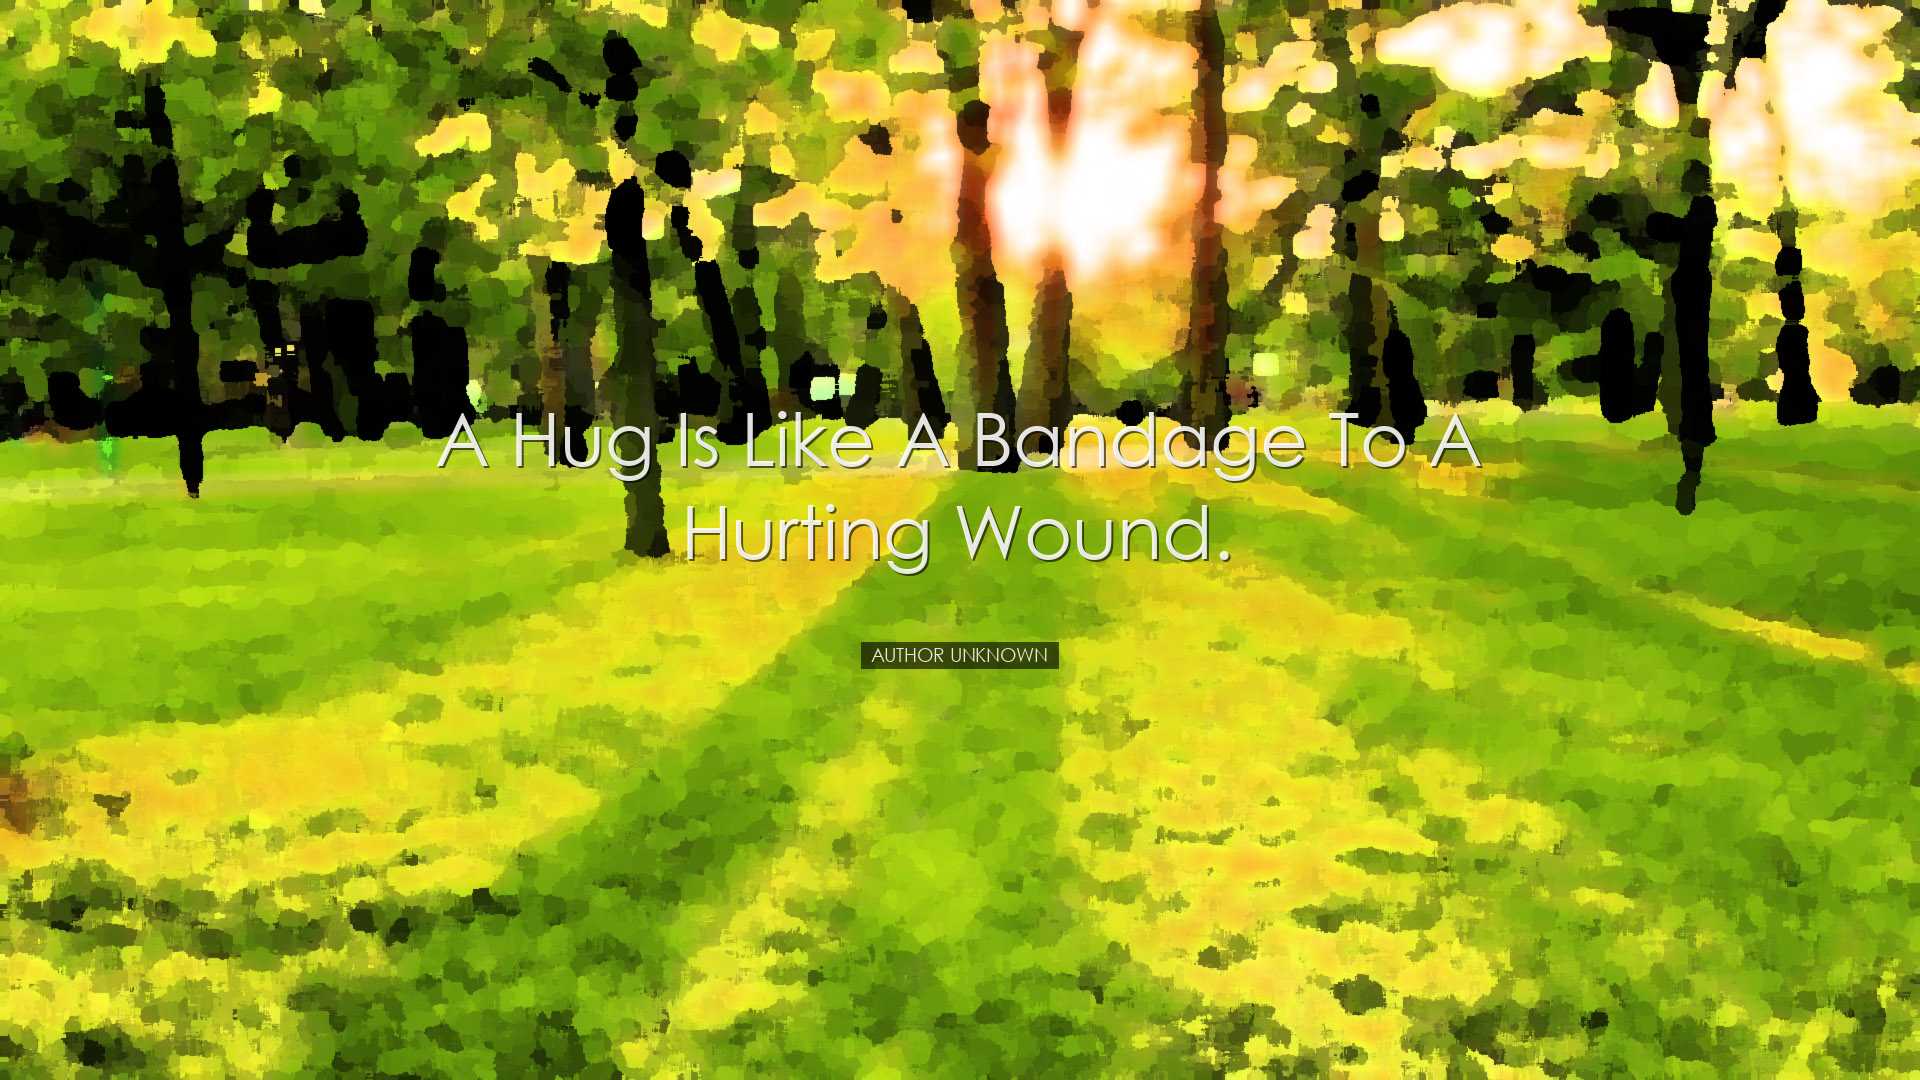 A hug is like a bandage to a hurting wound. - Author Unknown